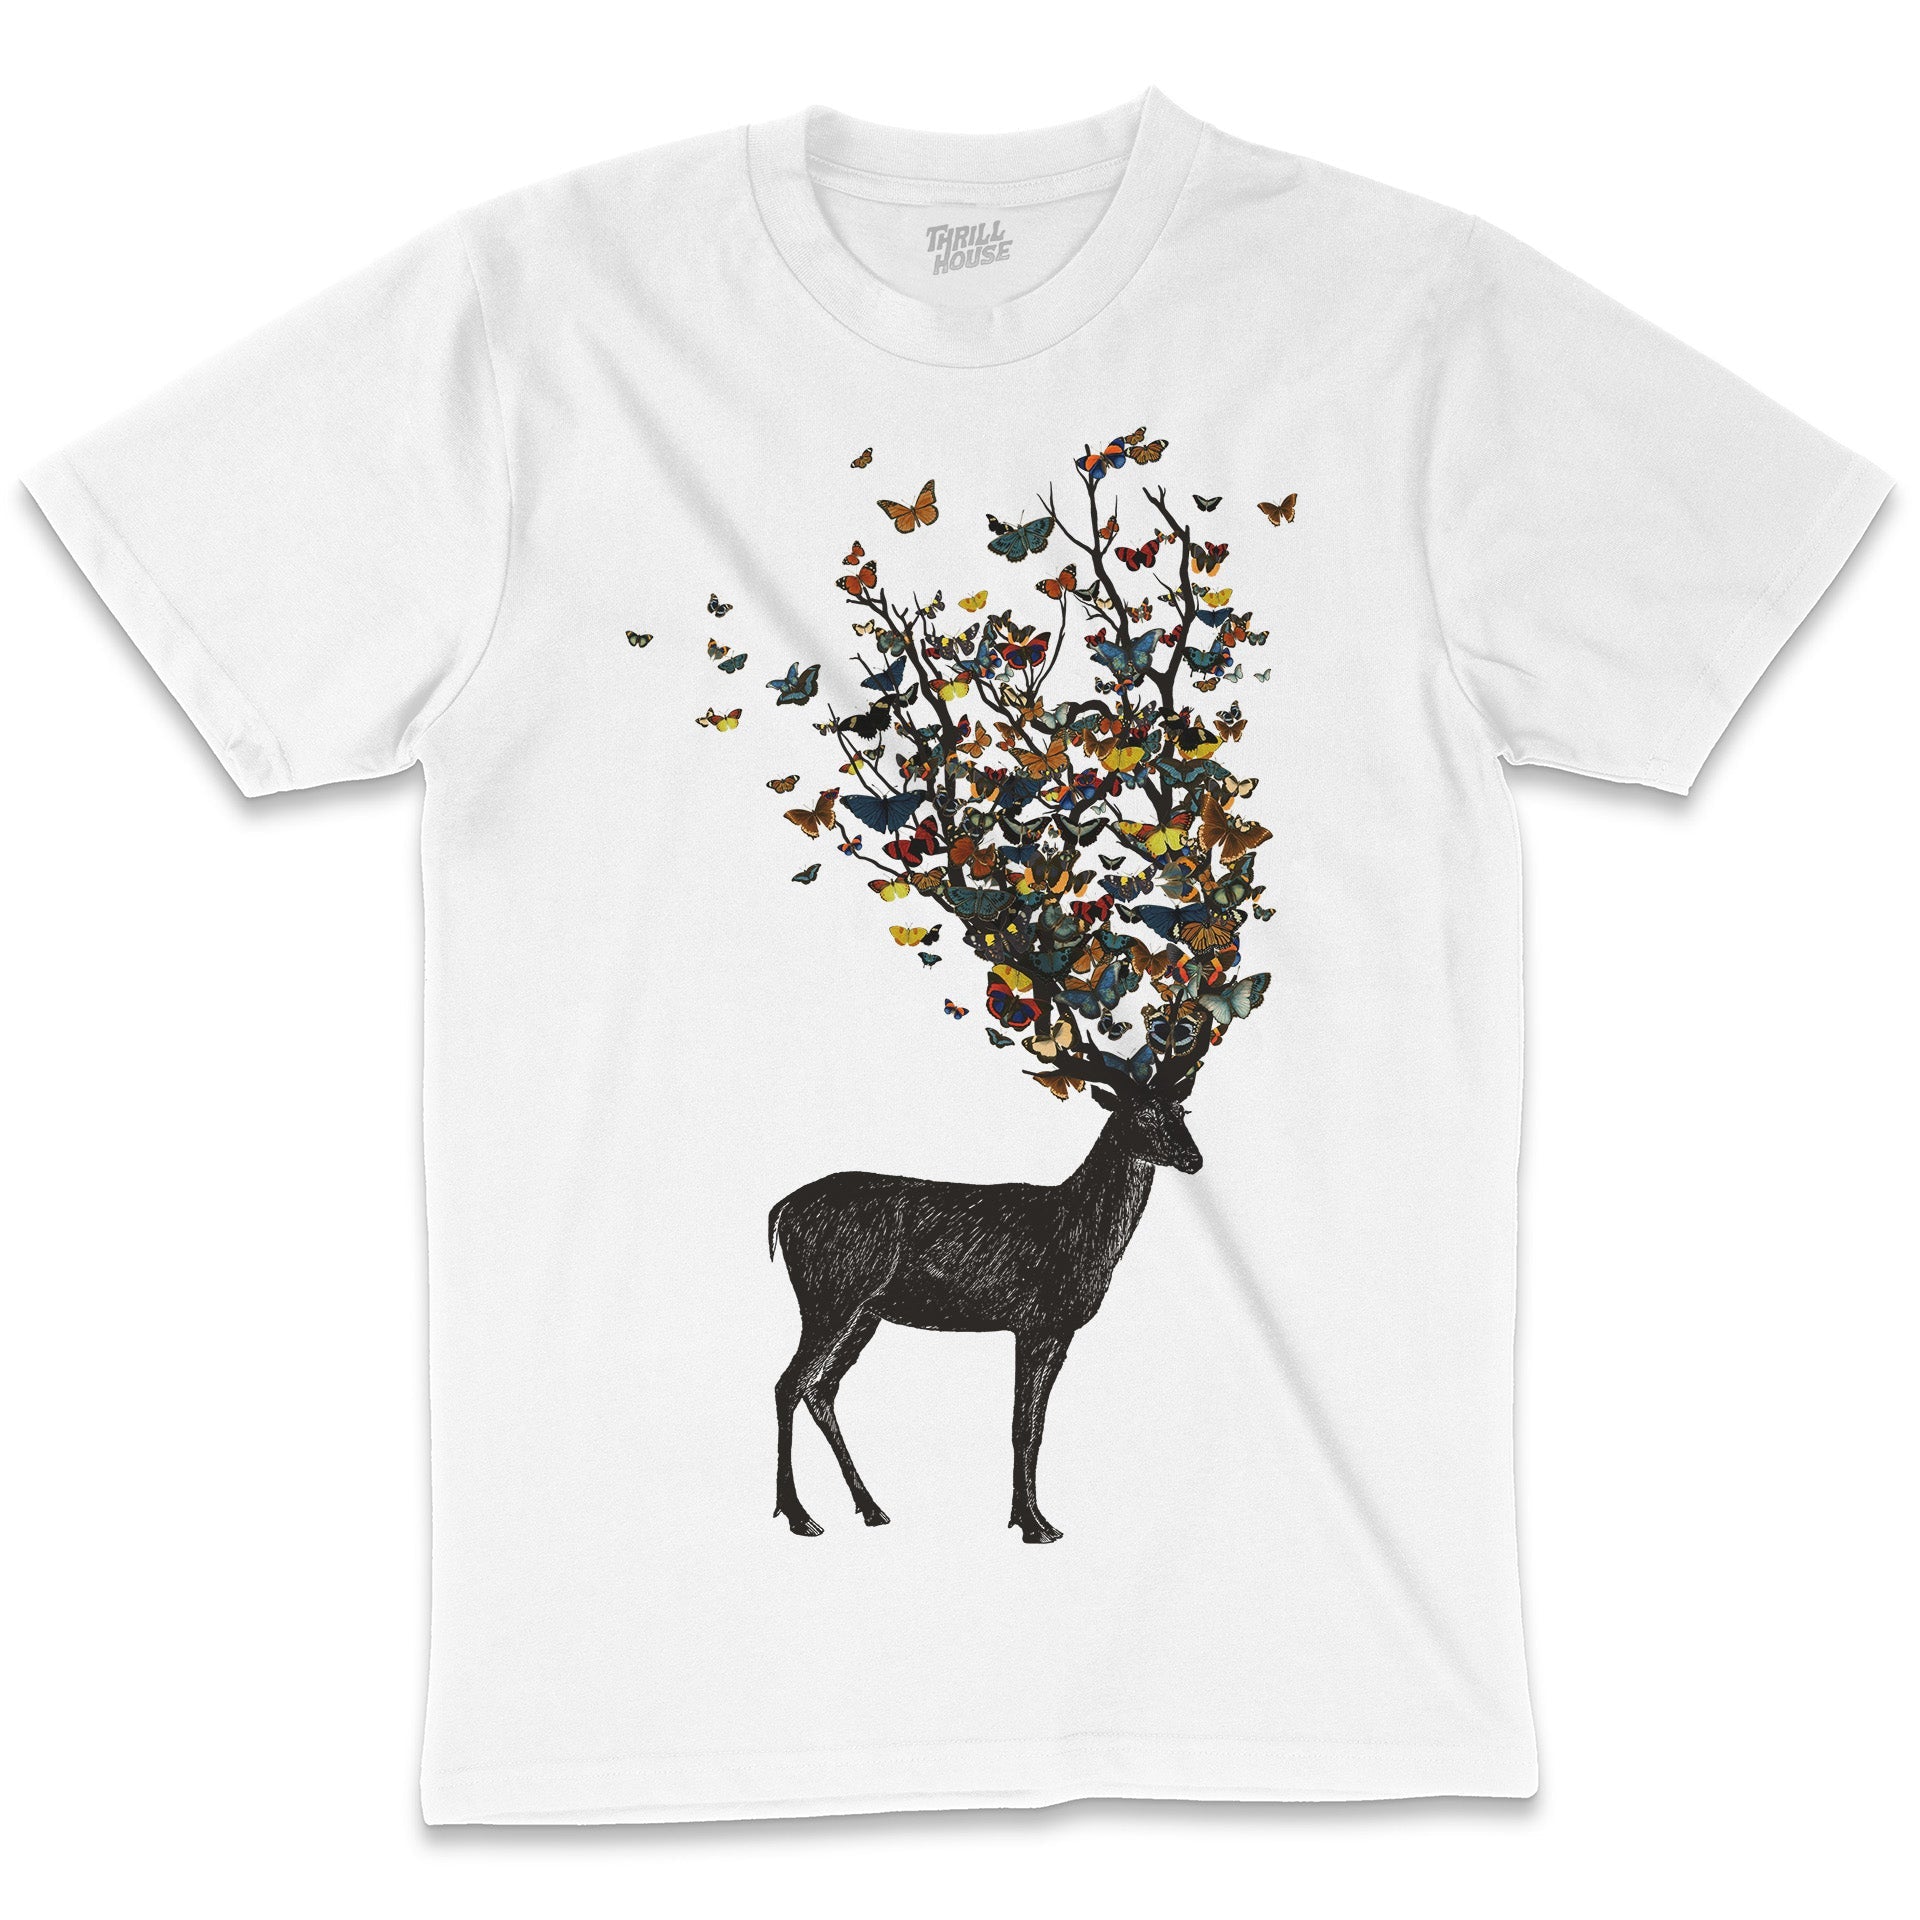 Wild Nature Cool Artistic Animal Flowers Floral Artsy Deer Outdoors Cool Cotton Graphic T-Shirt